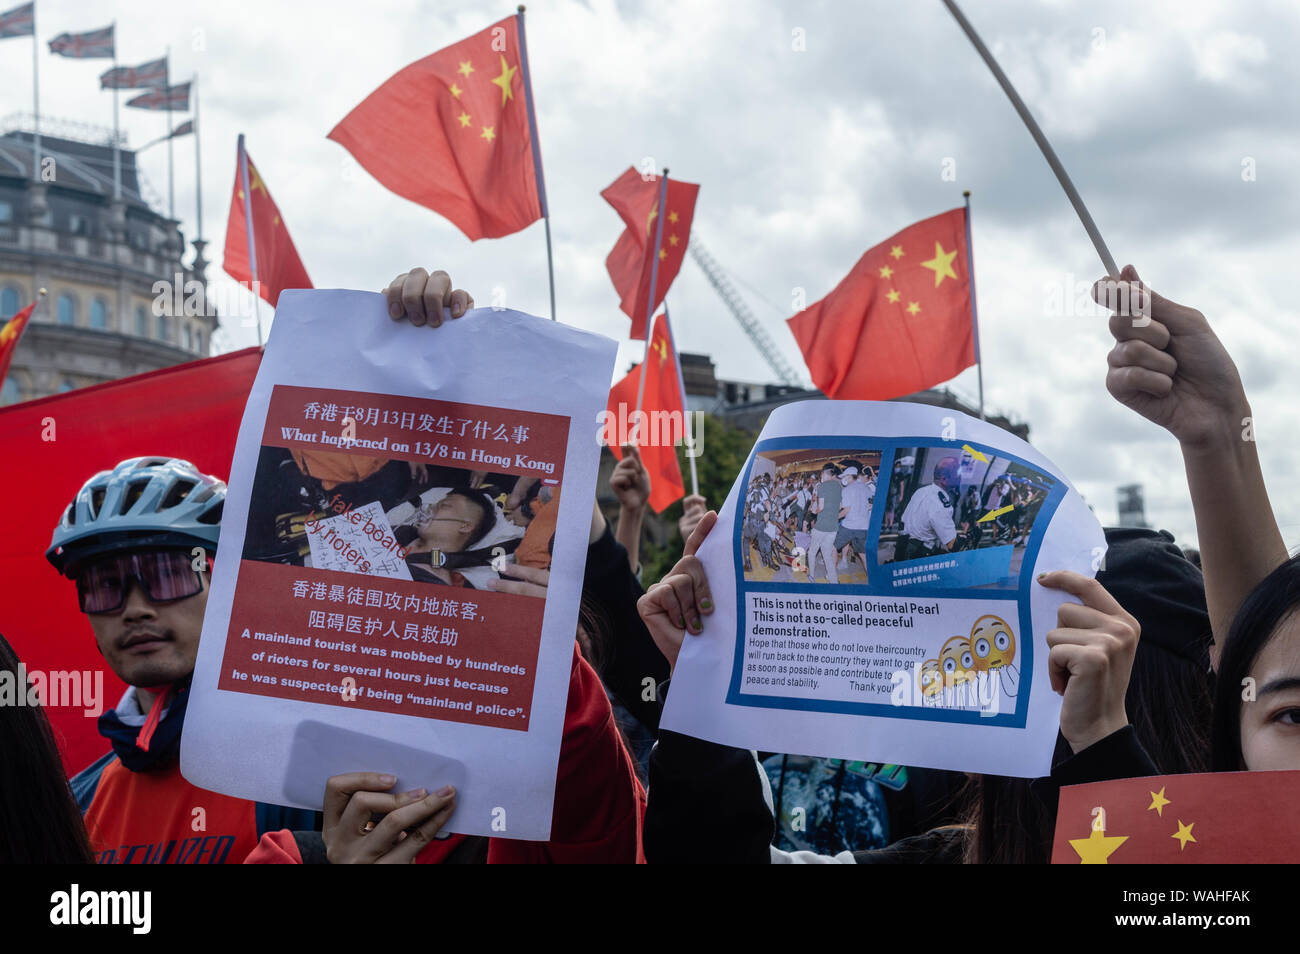 London, United Kingdom - August 17,  2019: Opponents of the UK Solidarity with Hong Kong rally holding up posters Stock Photo